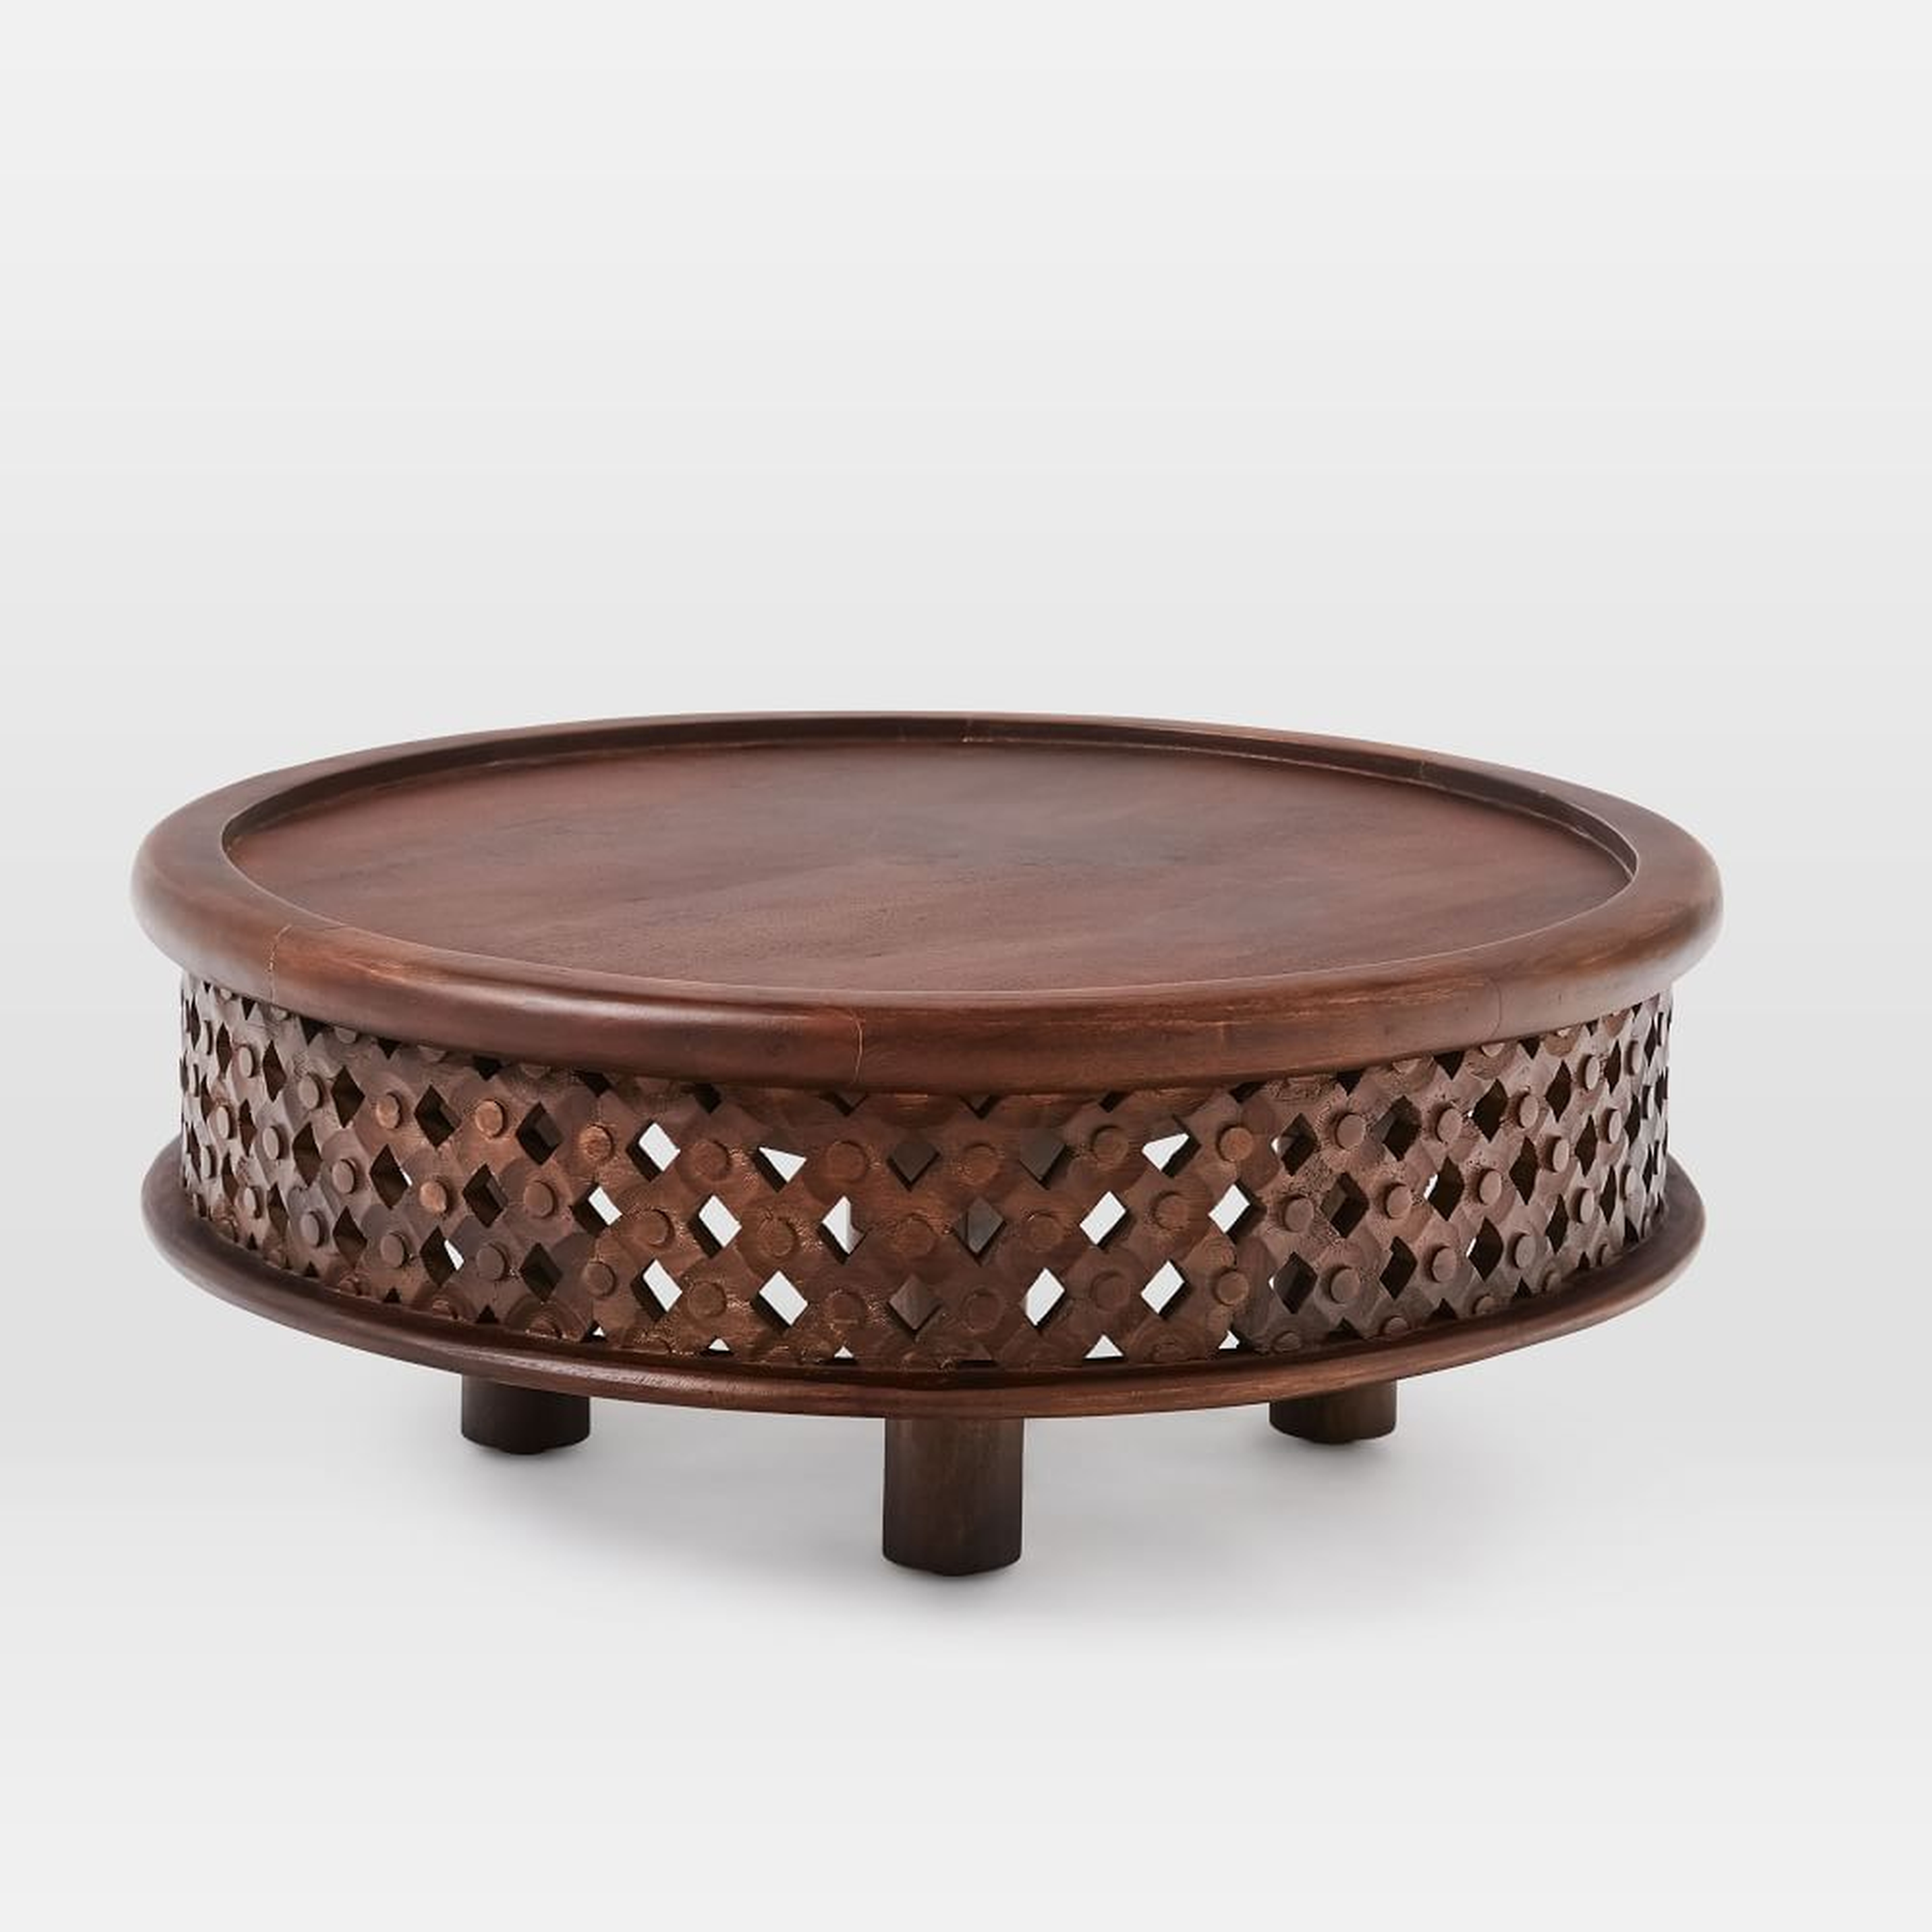 Carved Wood Coffee Table, Cafe - West Elm